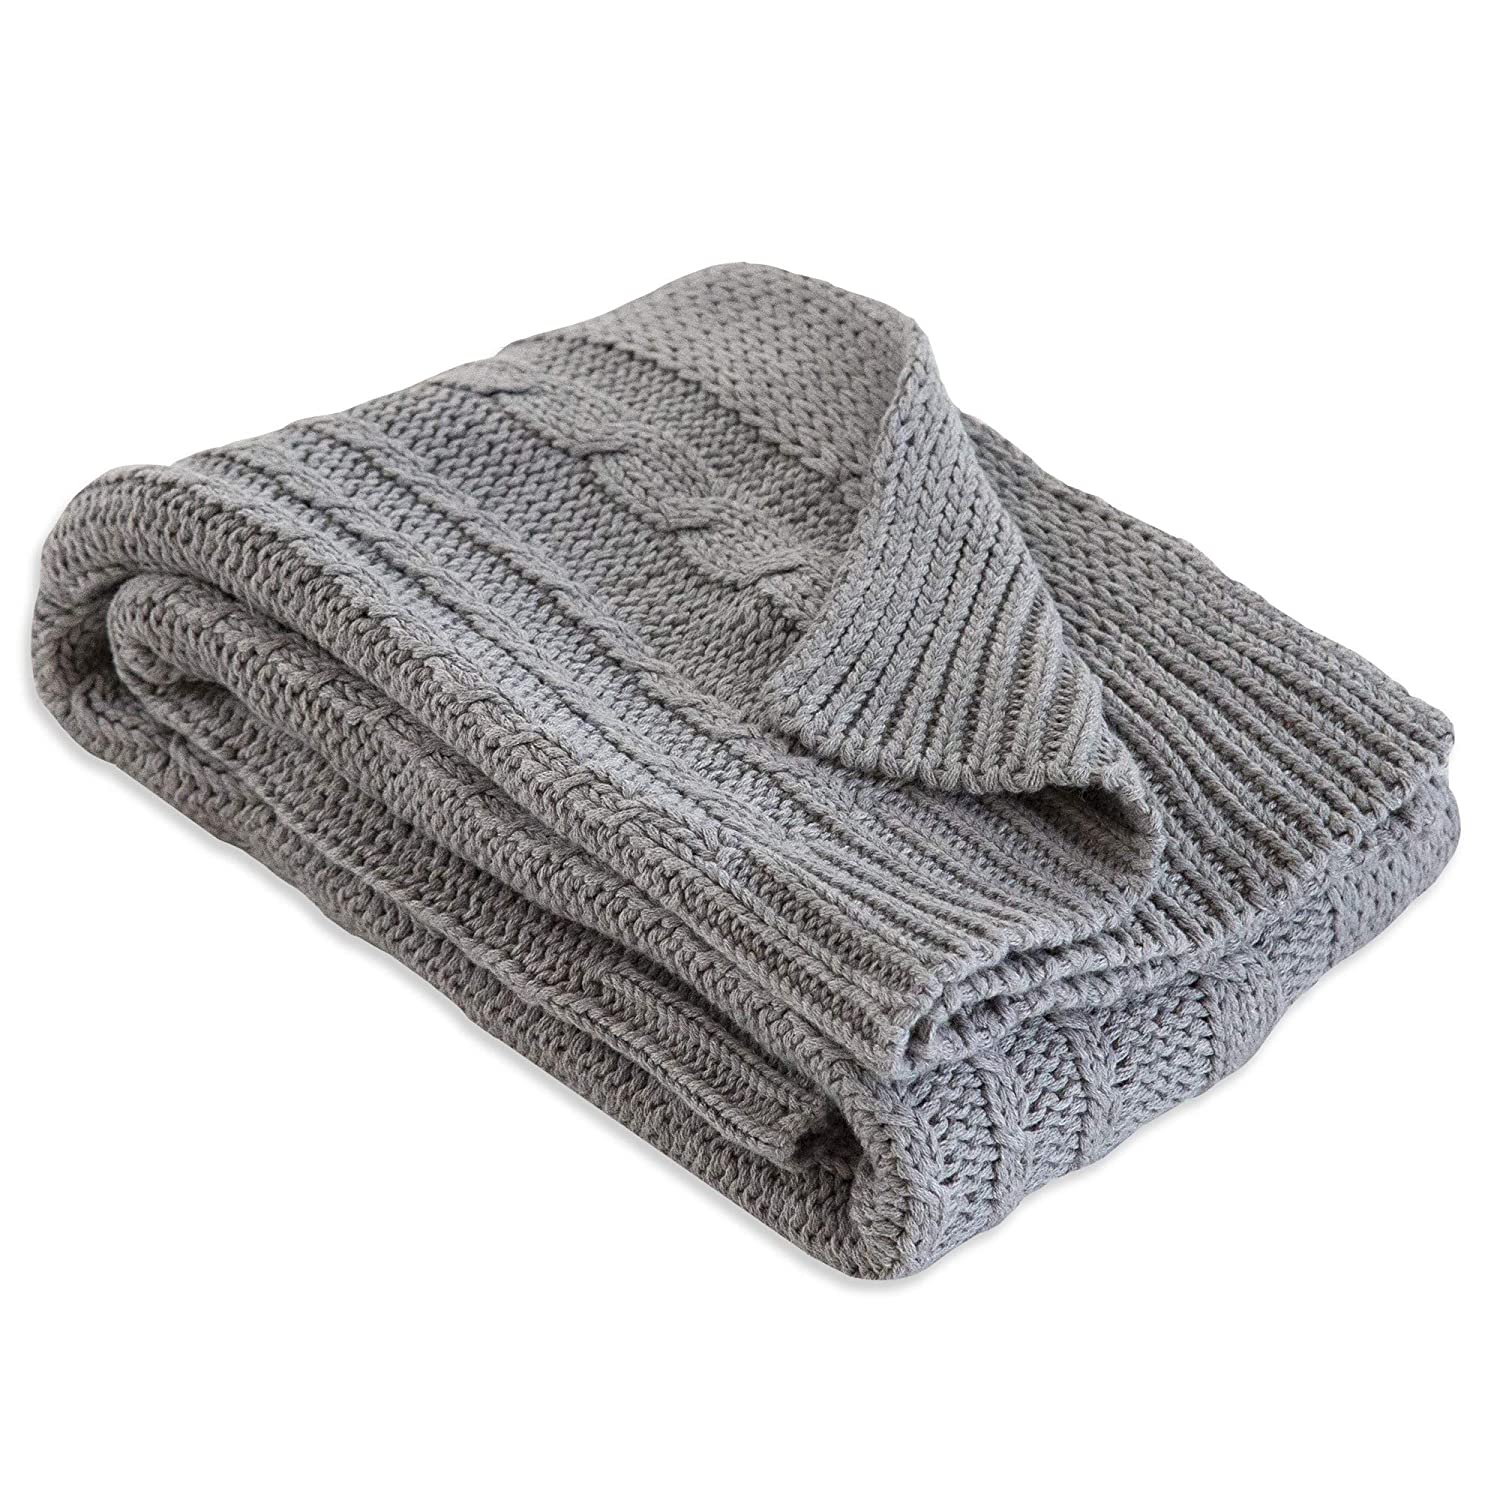 30" x 40" Burt's Bees Baby Cable Knit Blanket $15.59 + Free Shipping w/ Prime or on $25+